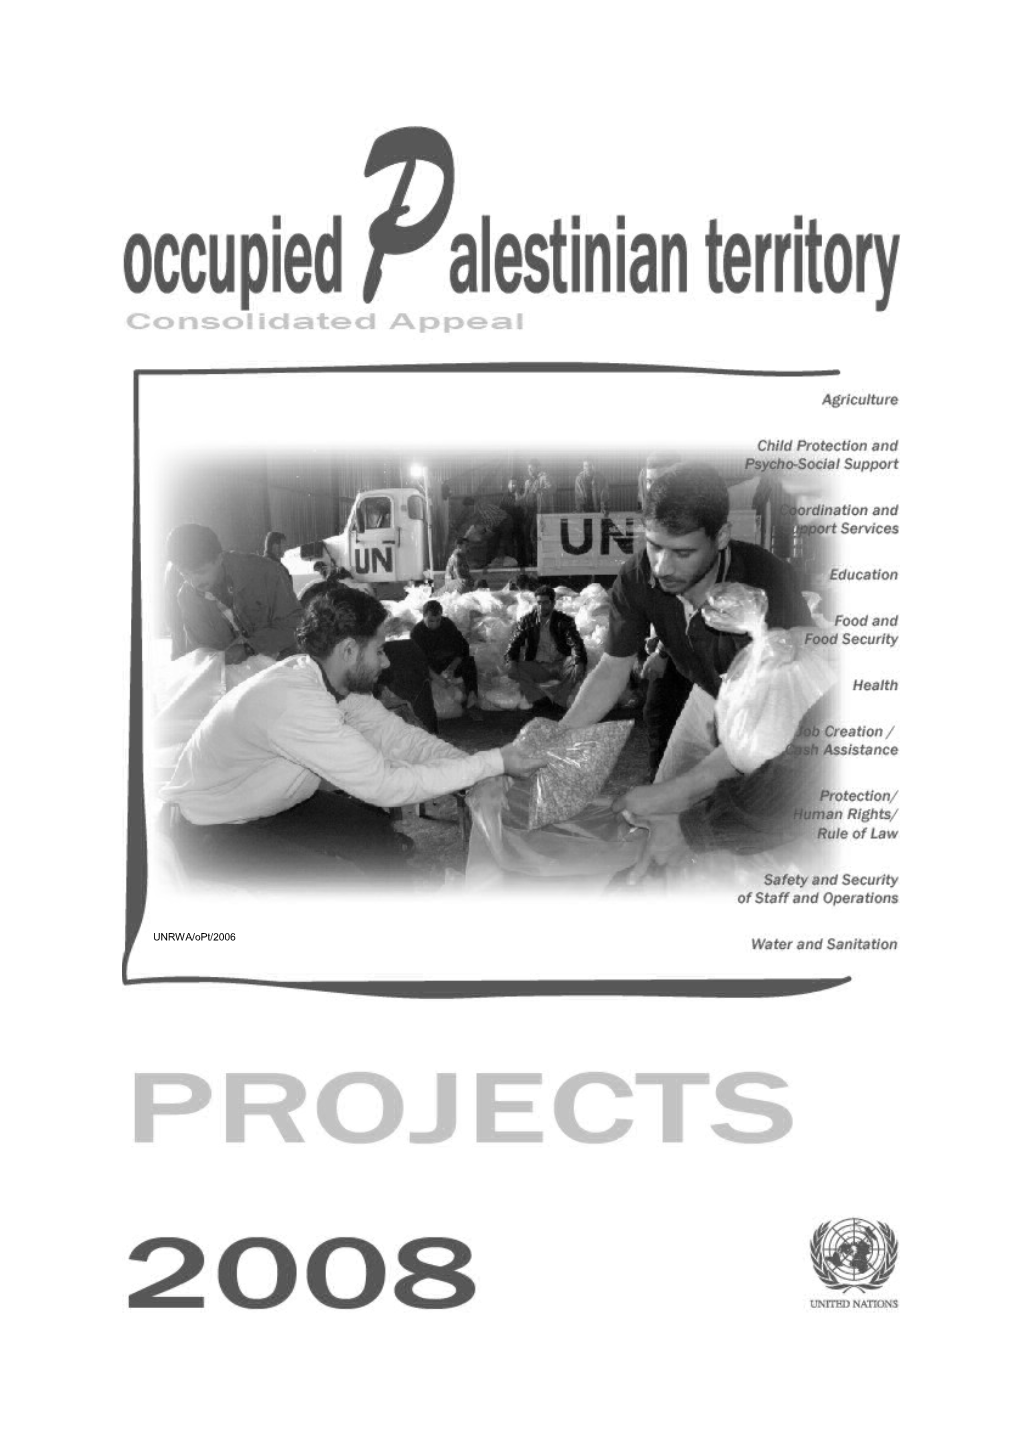 Consolidated Appeal For Occupied Palestinian Territory 2008 Vol 2 (Word)